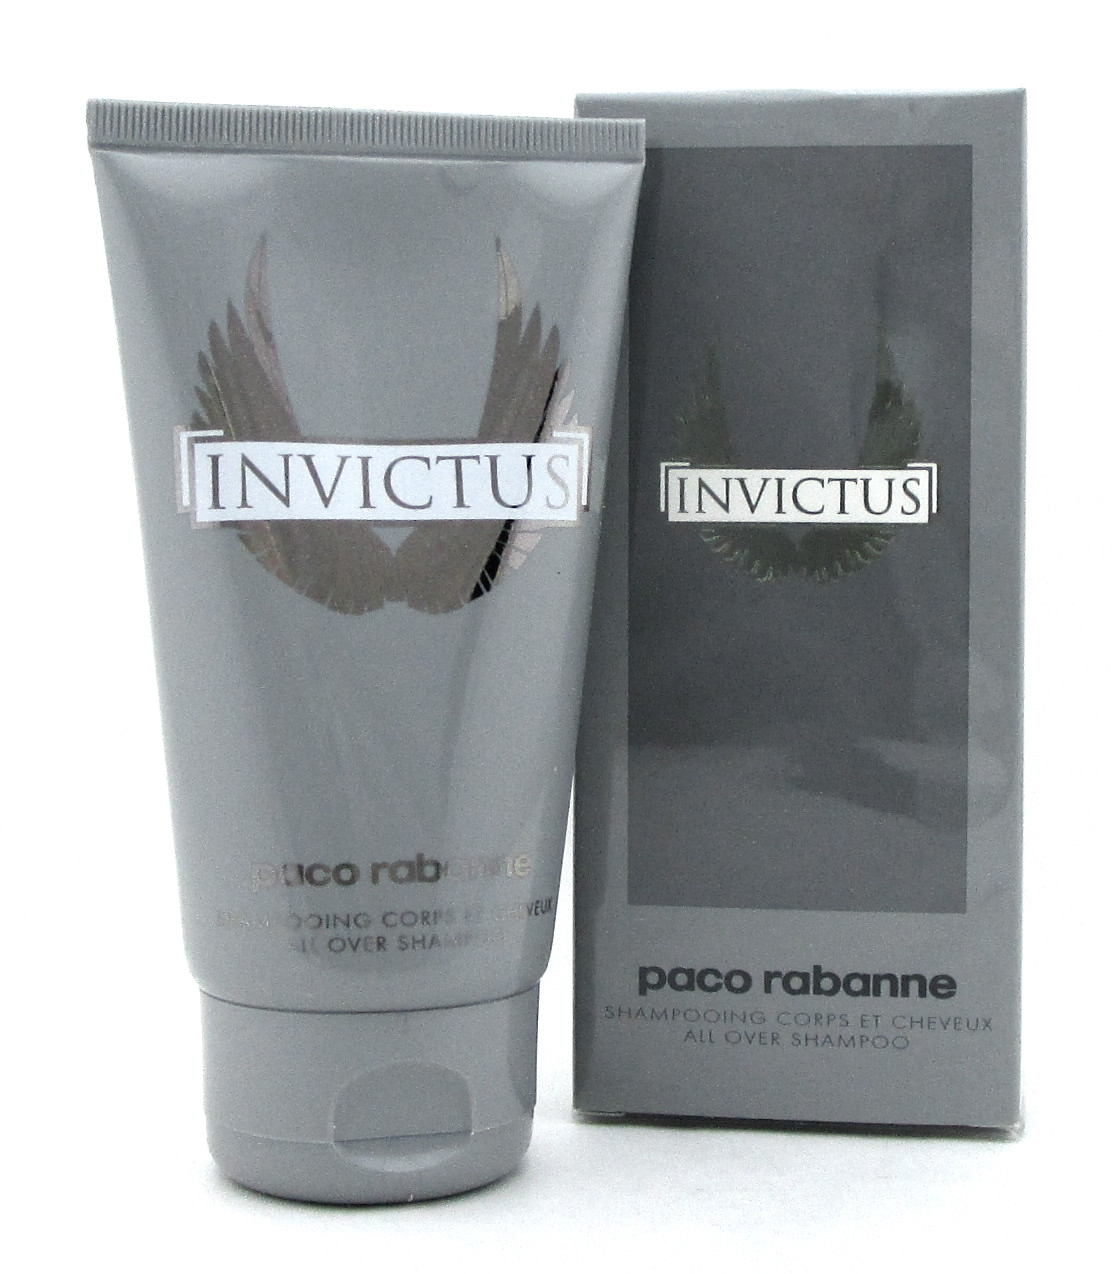 Invictus by Paco Rabanne 5.1 oz. All Over Shampoo for Men. New Sealed ...